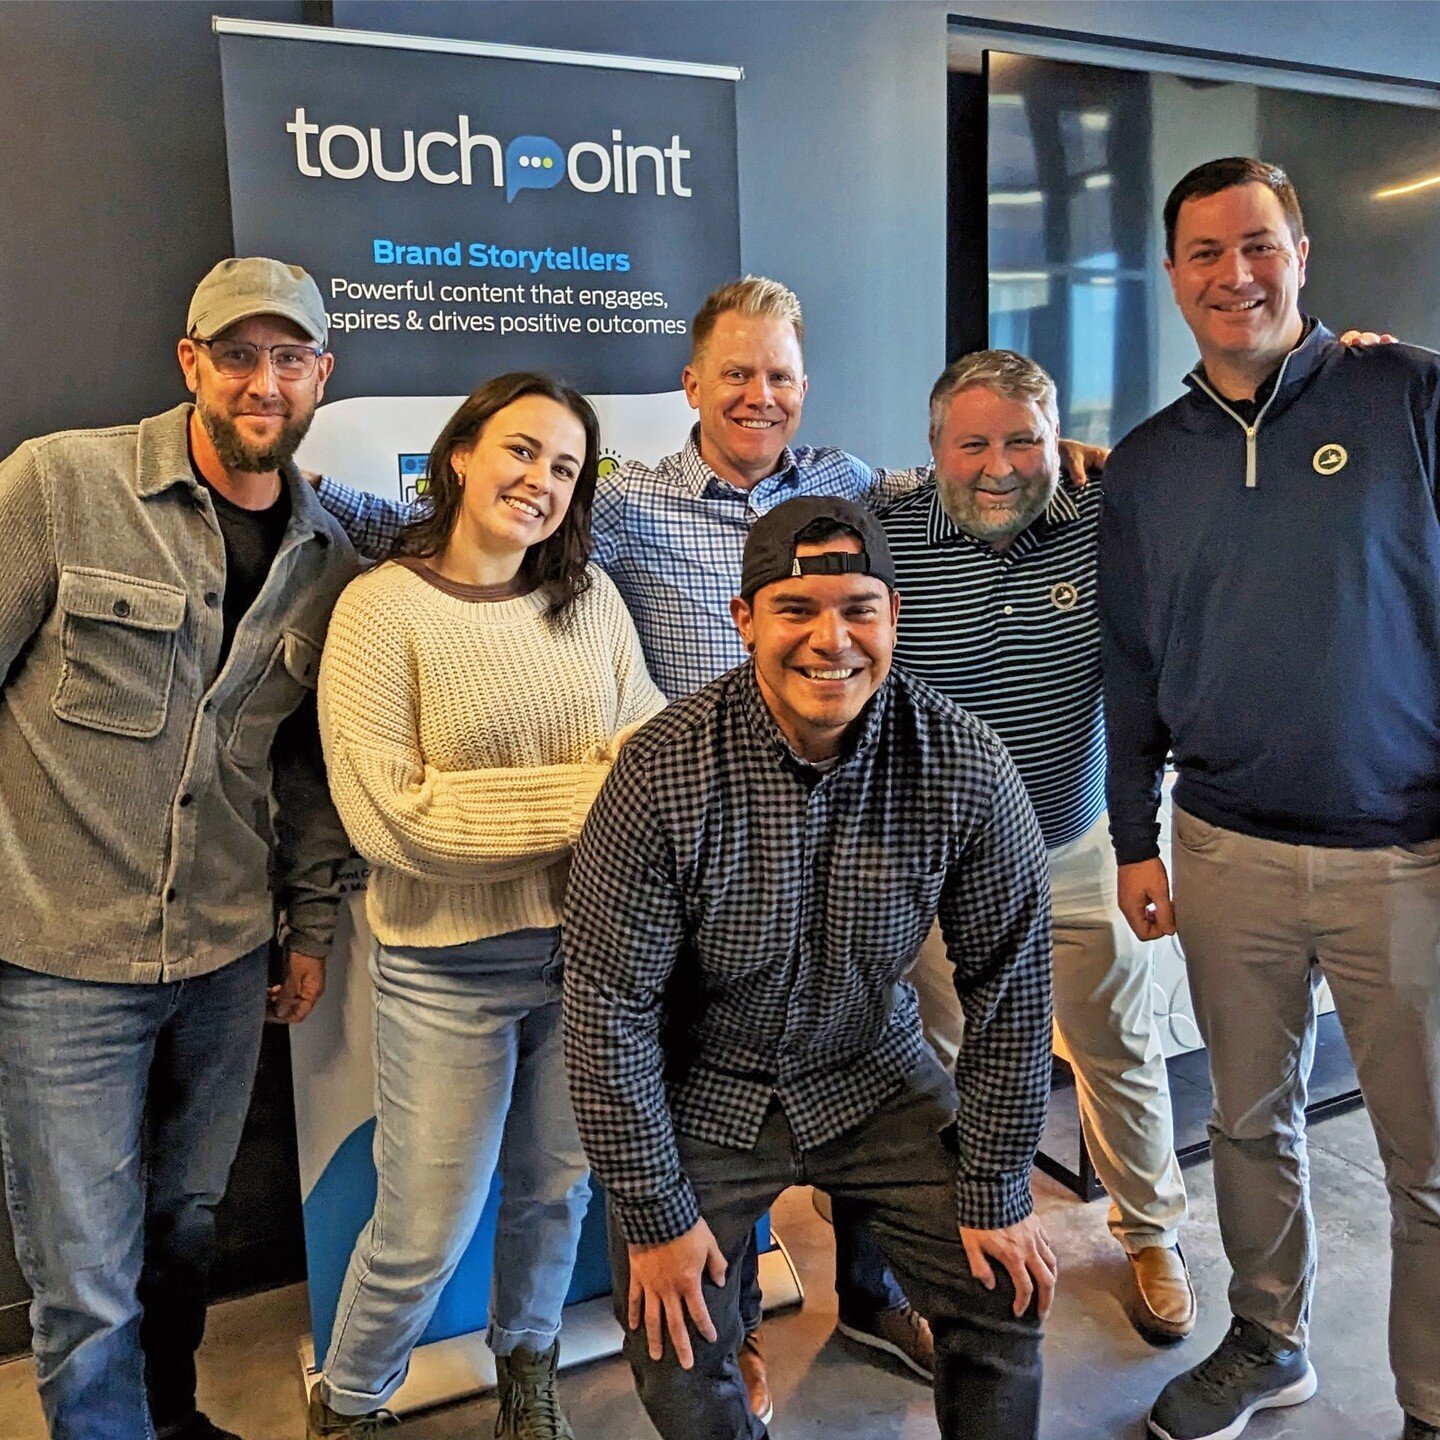 We had a blast hosting our friends from the Virginia State Golf Association in Minnesota last week! For more than 20 years Touchpoint has been a proud partner of the VSGA, and we can&rsquo;t wait for what the future holds 🏌️&zwj;♂️⛳